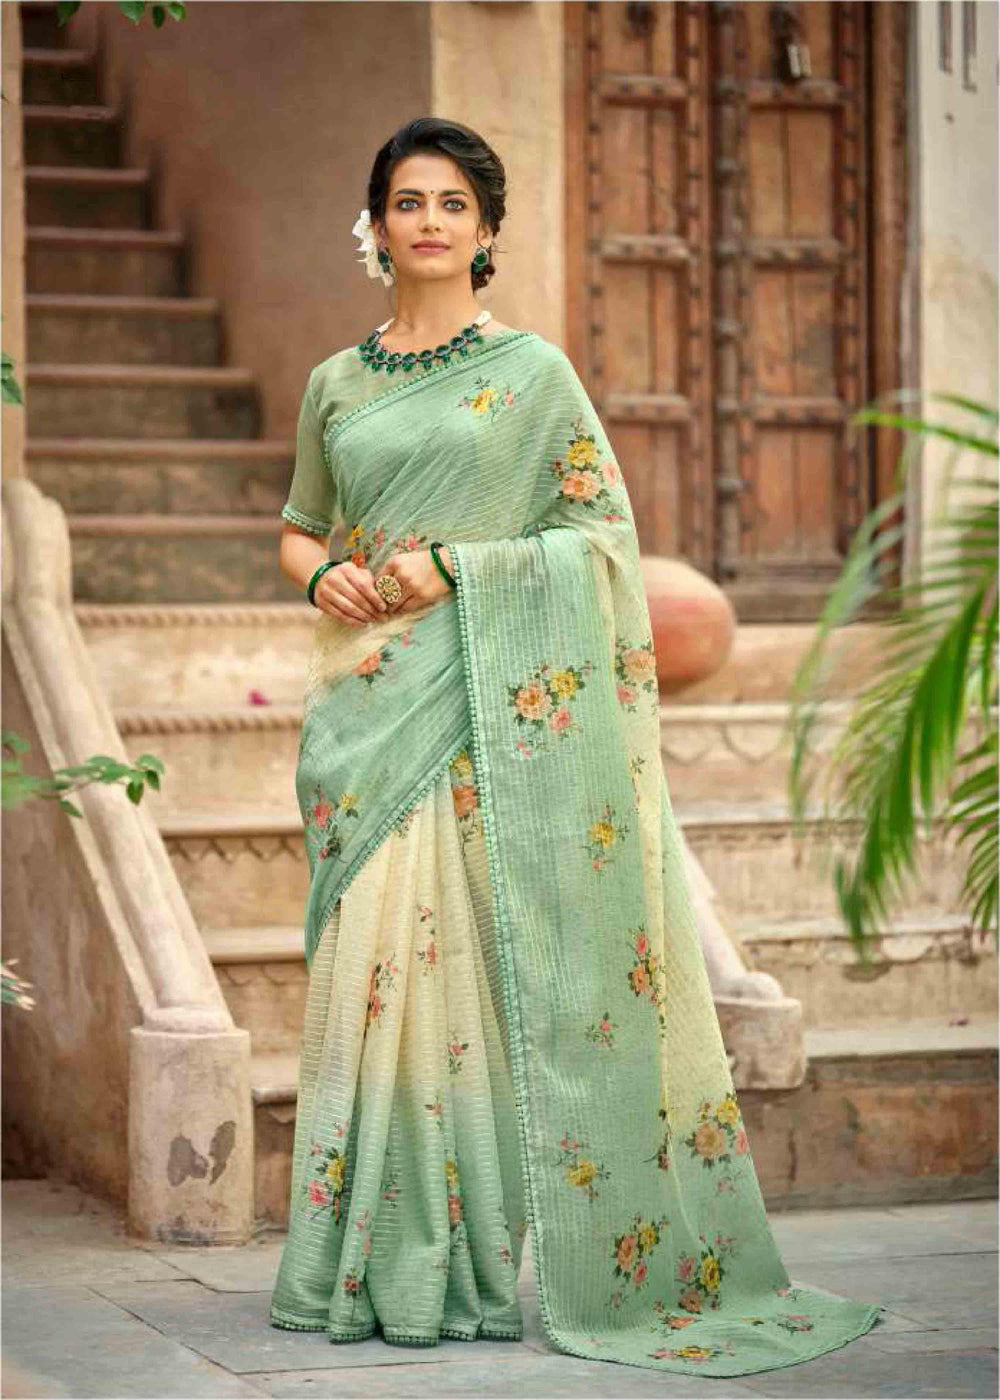 woman standing near steps in yellow green gradient floral crochet saree.